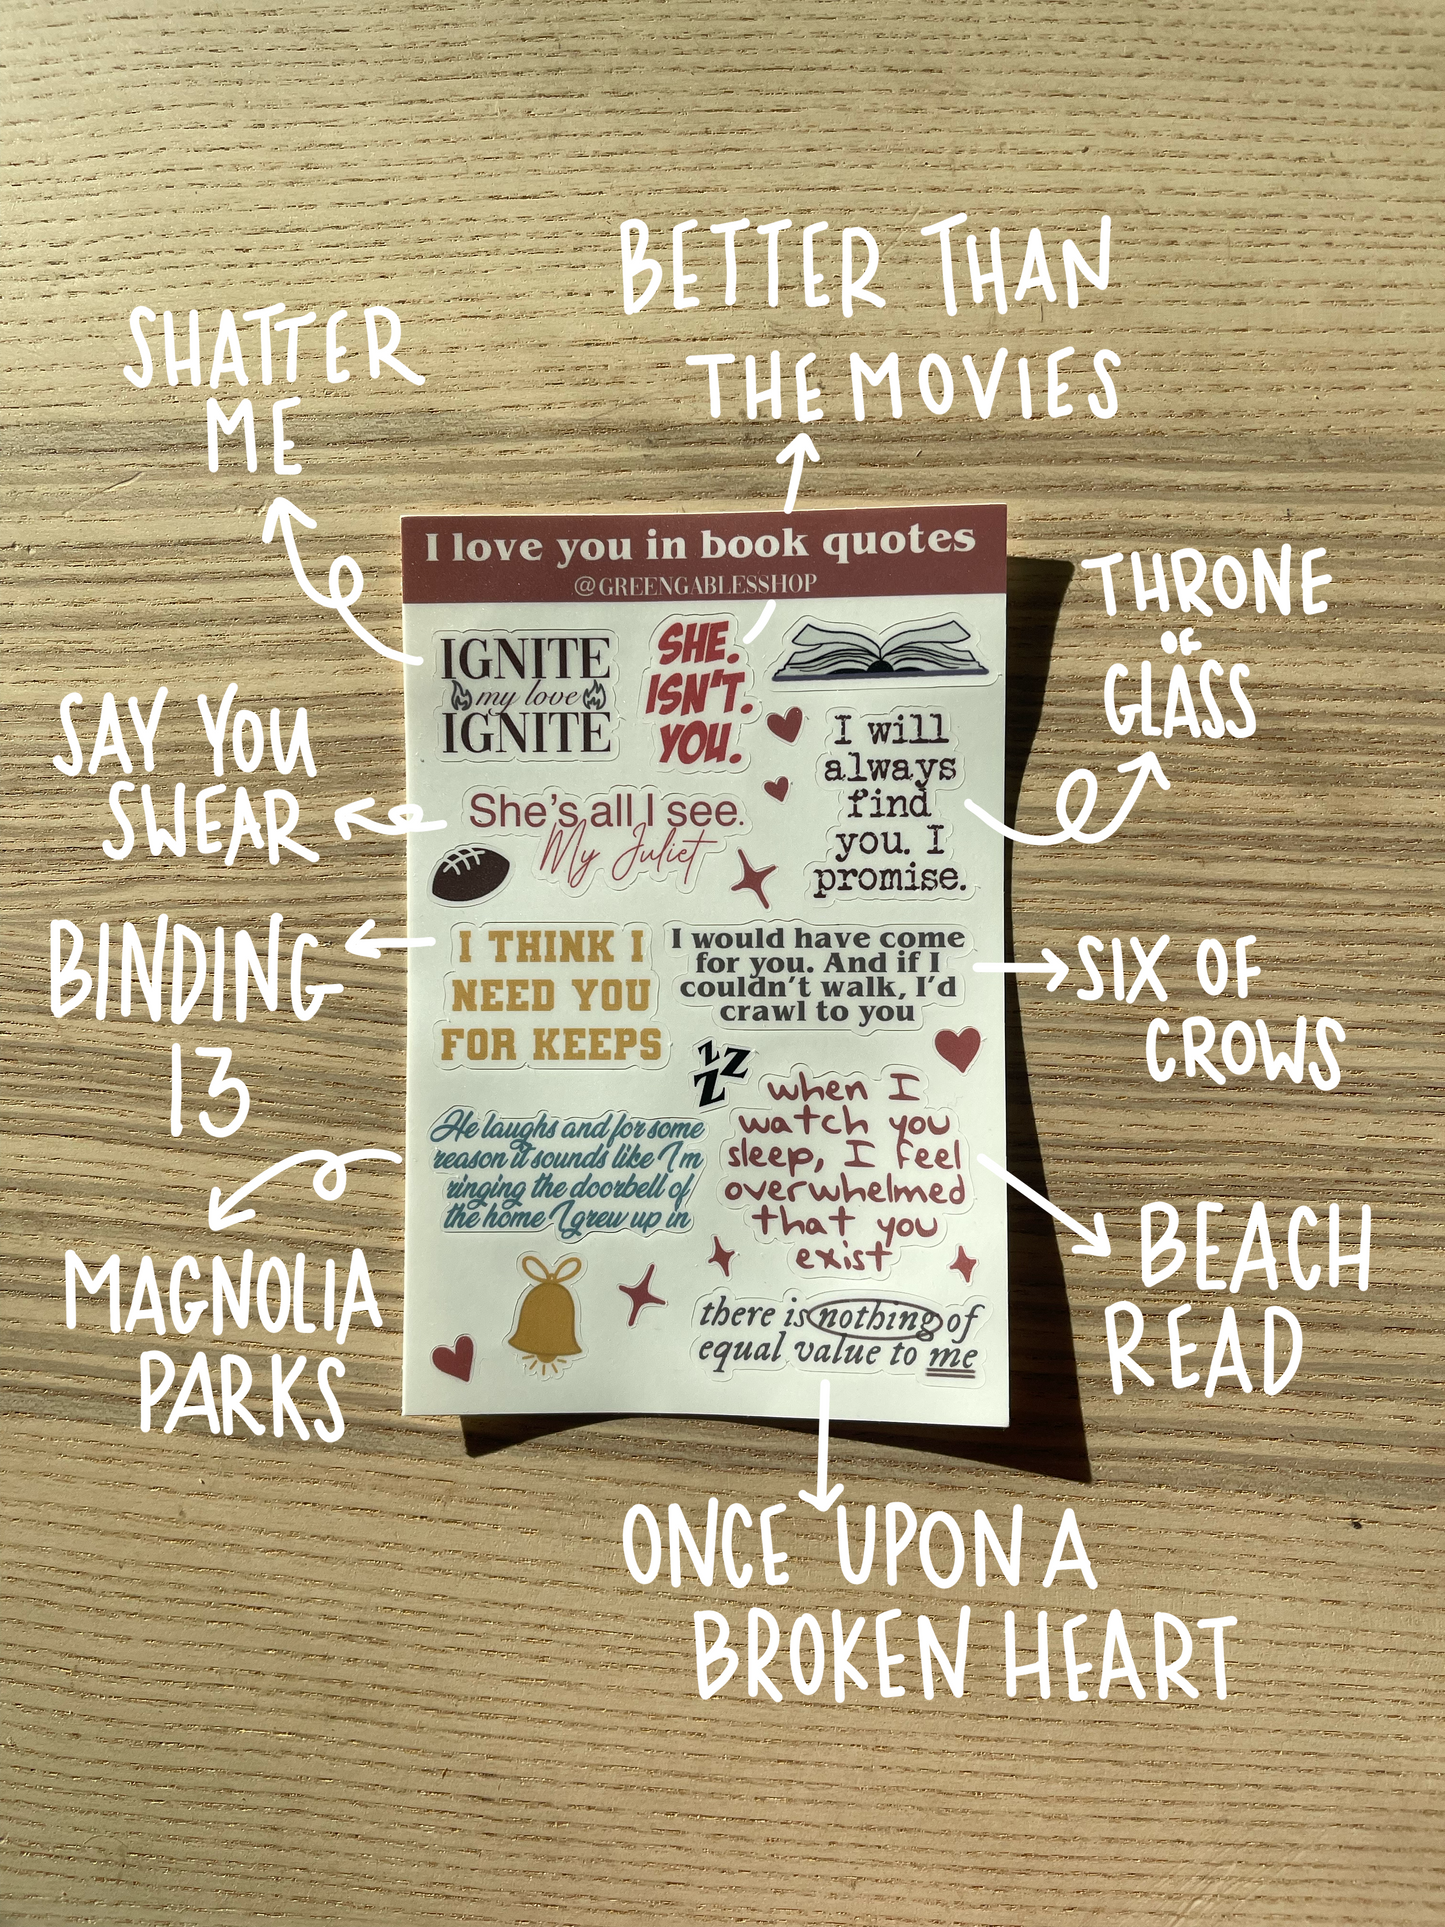 Book Quotes sticker sheet